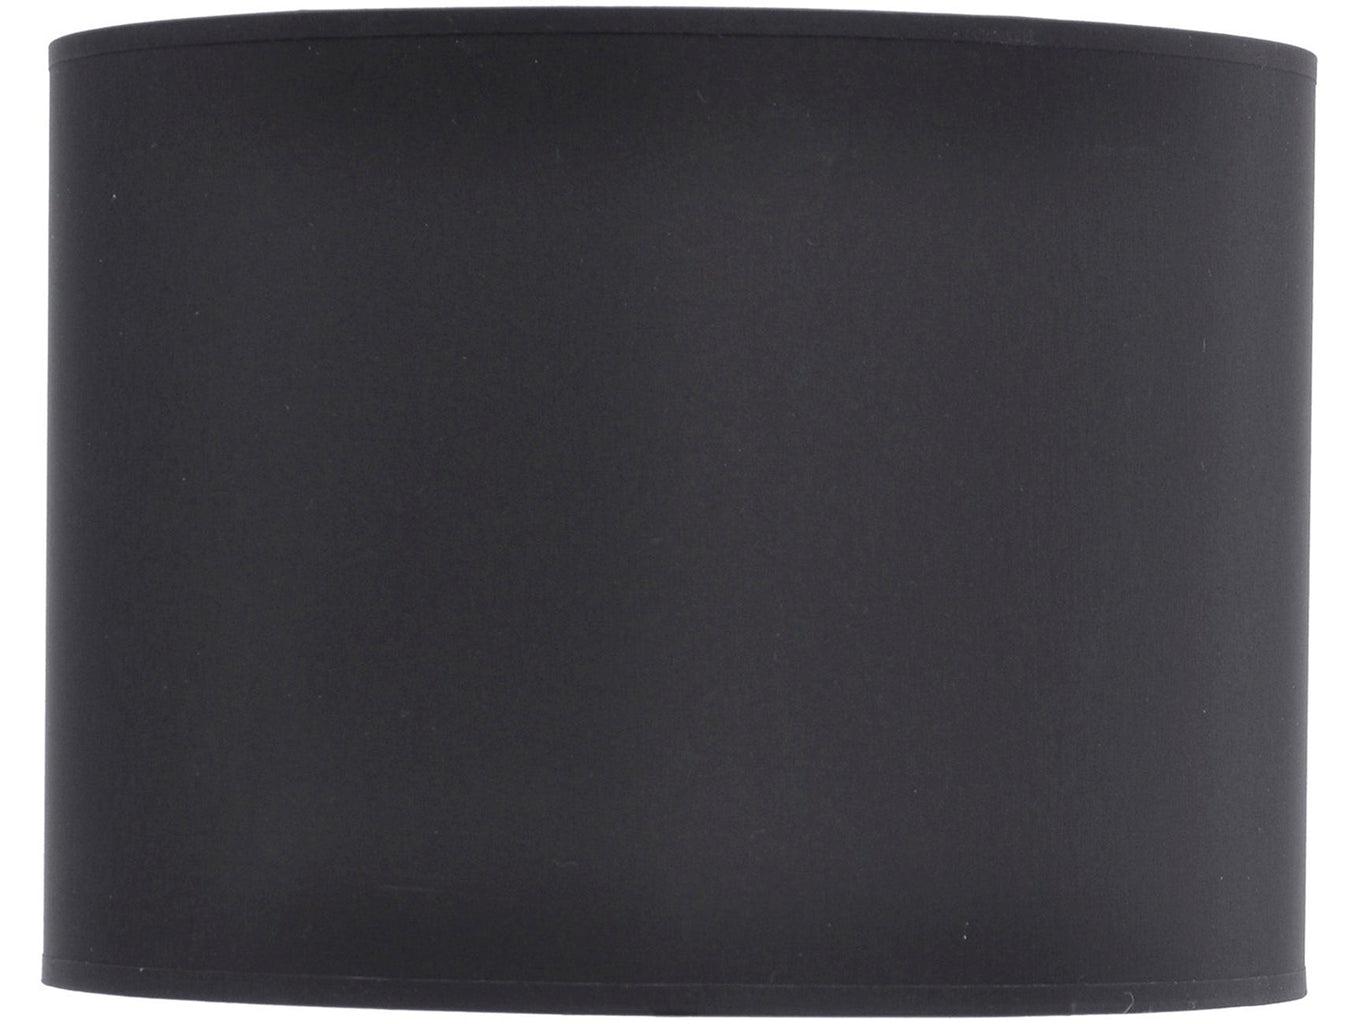 Opulent Black and Silver Lined Drum 14" Lampshade-Beaumonde